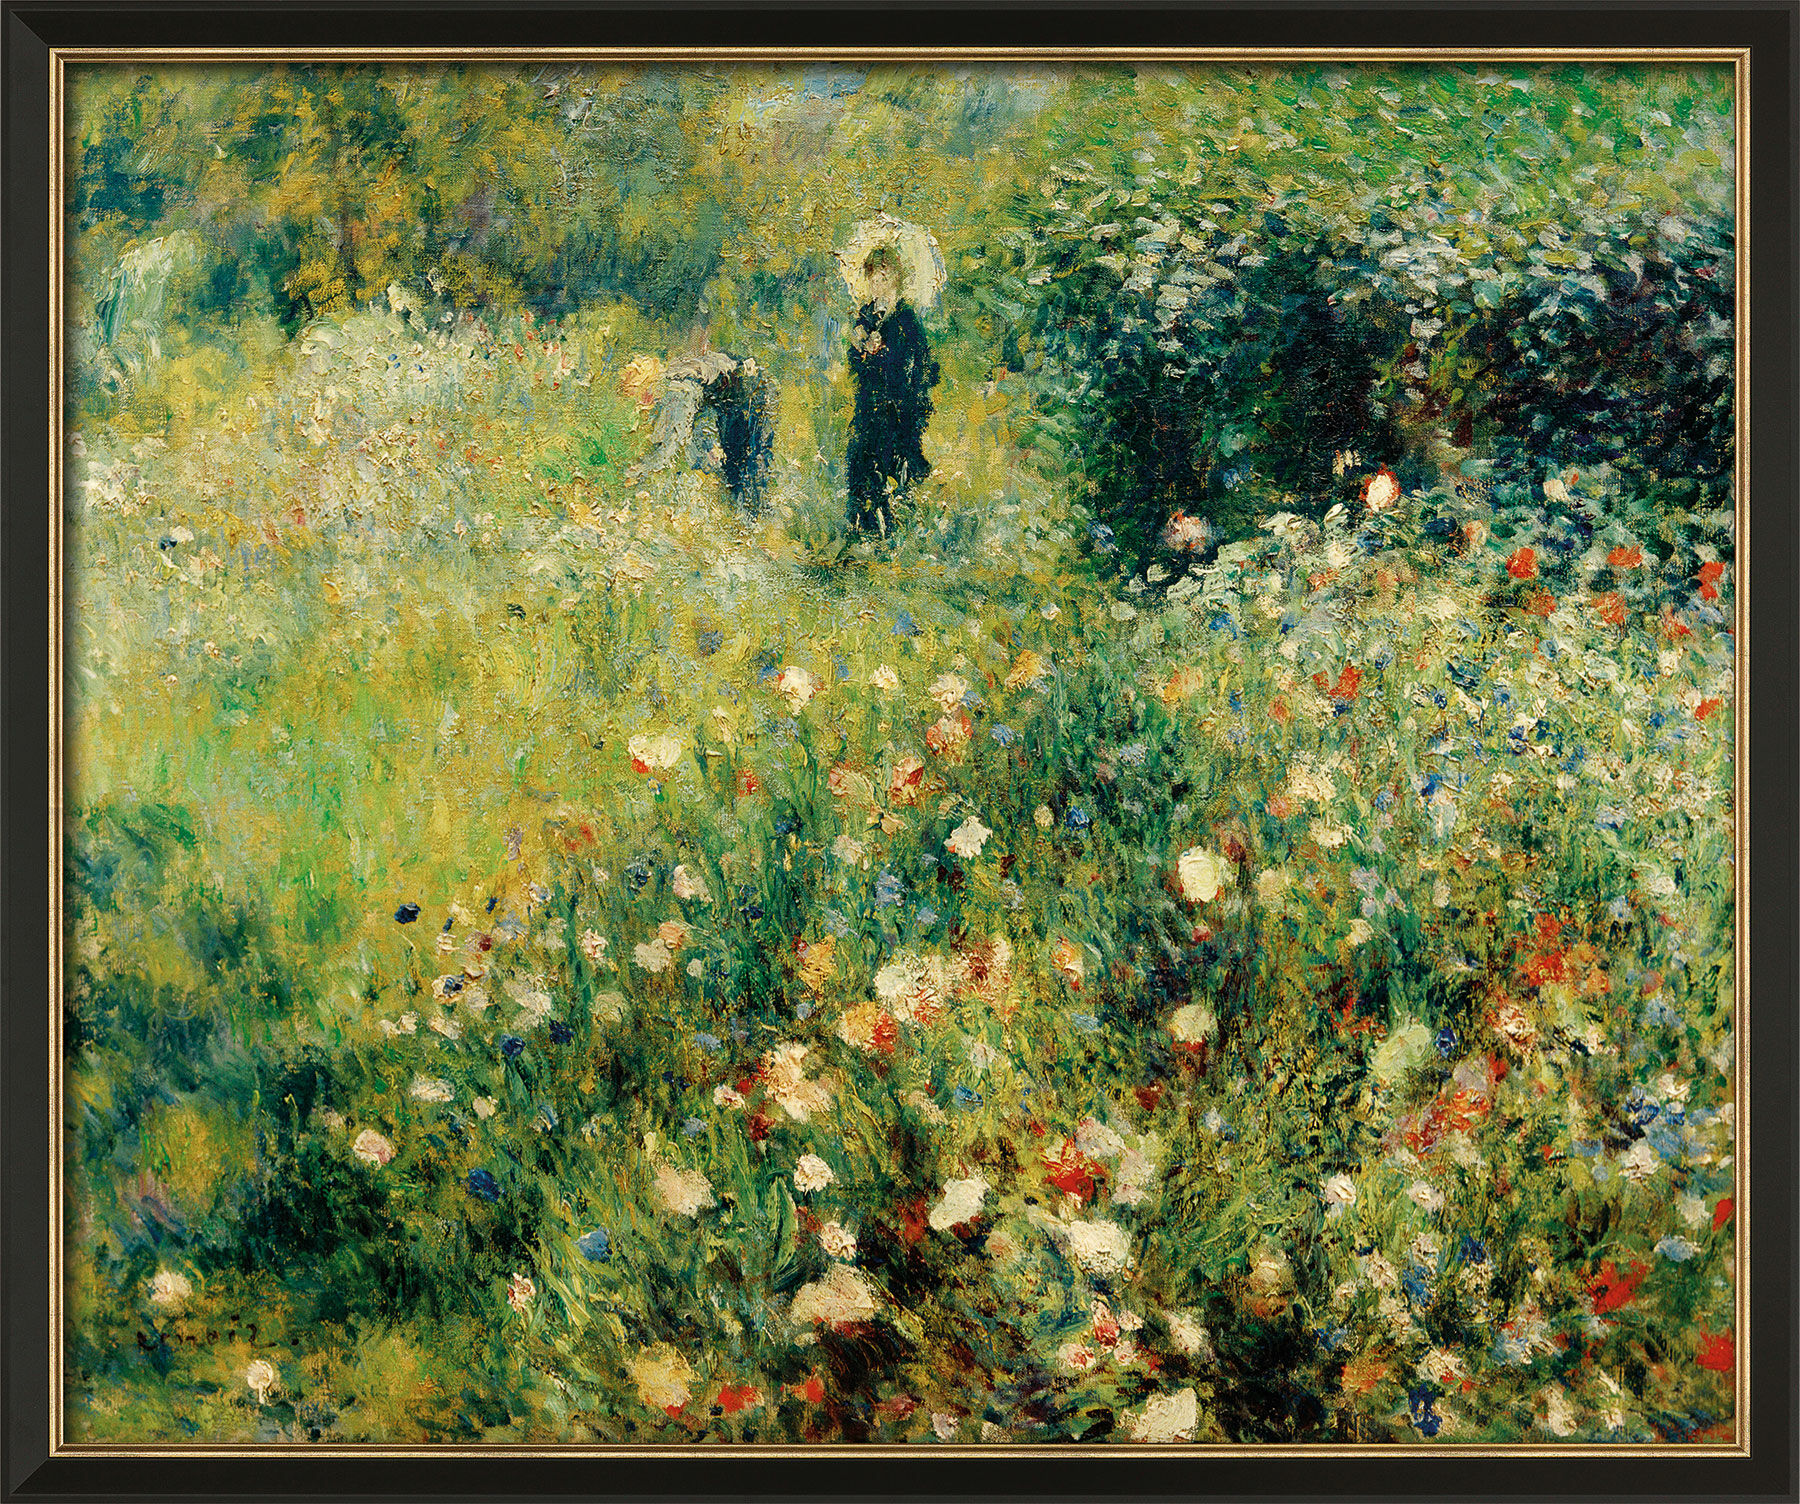 Picture "Woman with Parasol in a Garden" (1875), framed by Auguste Renoir